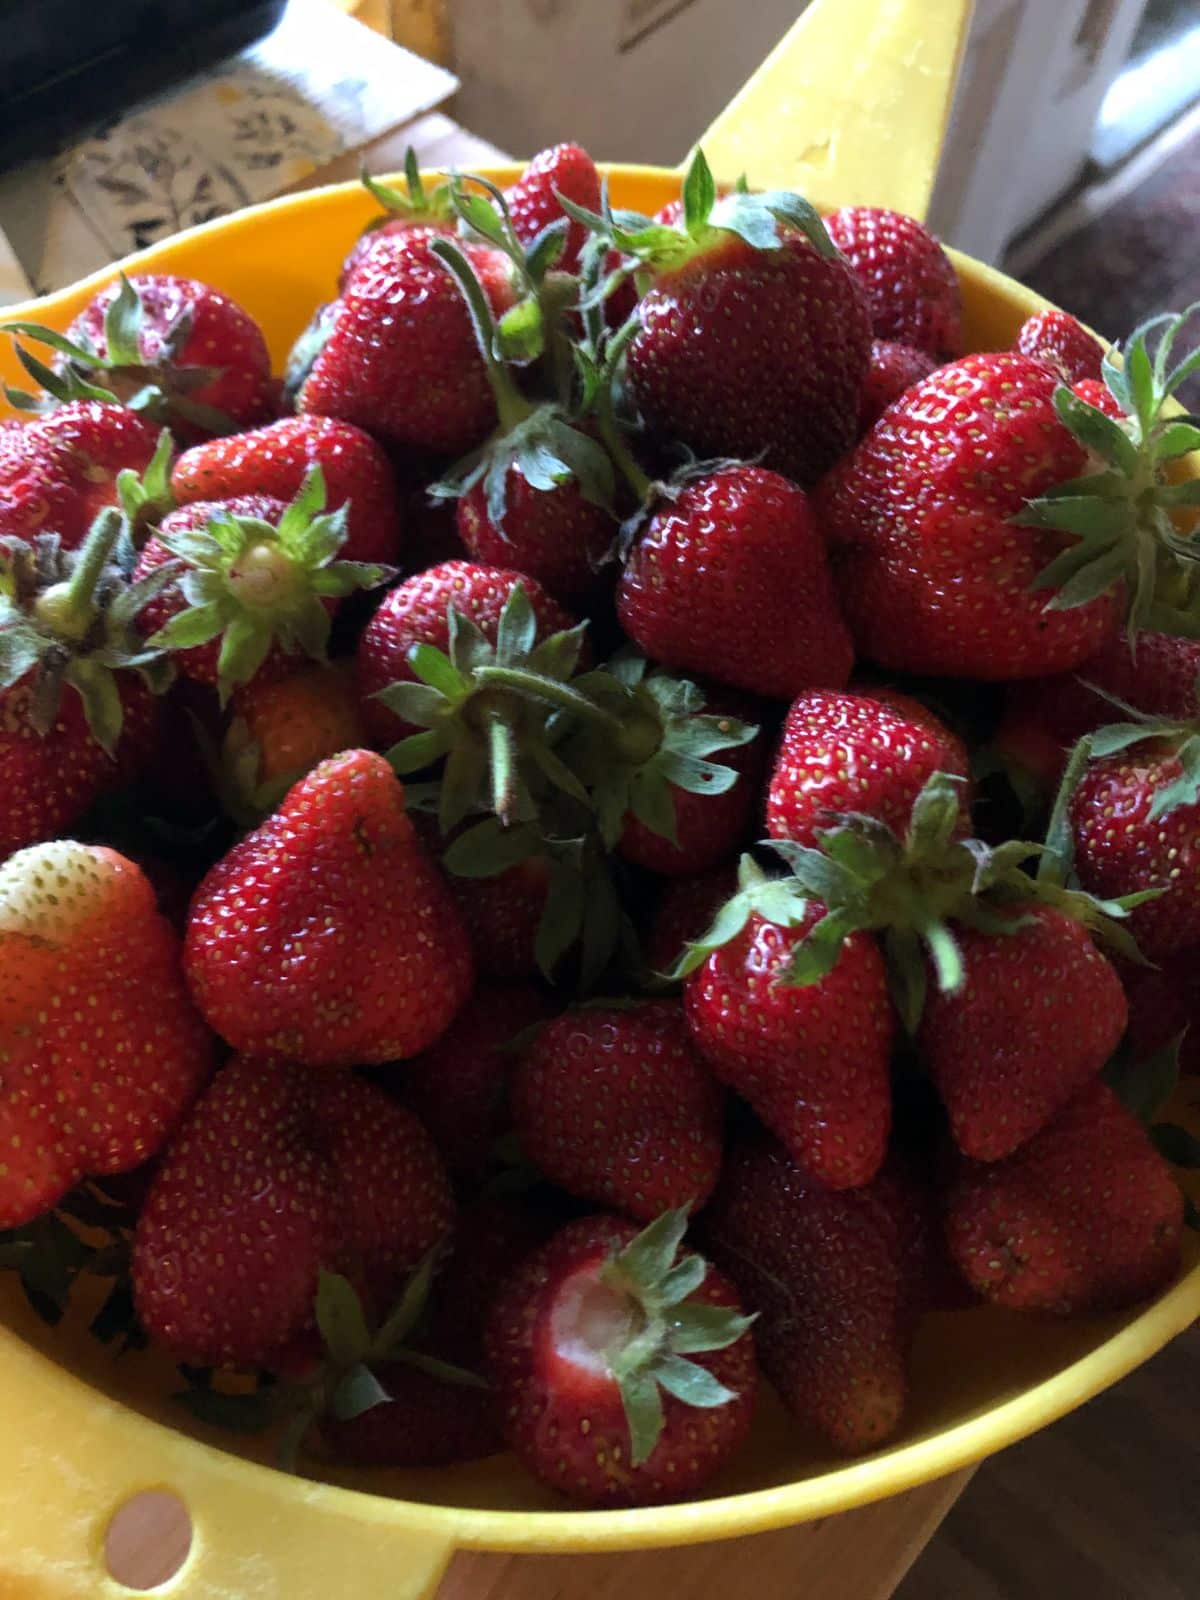 Strawberries in a basket at varying levels of ripeness